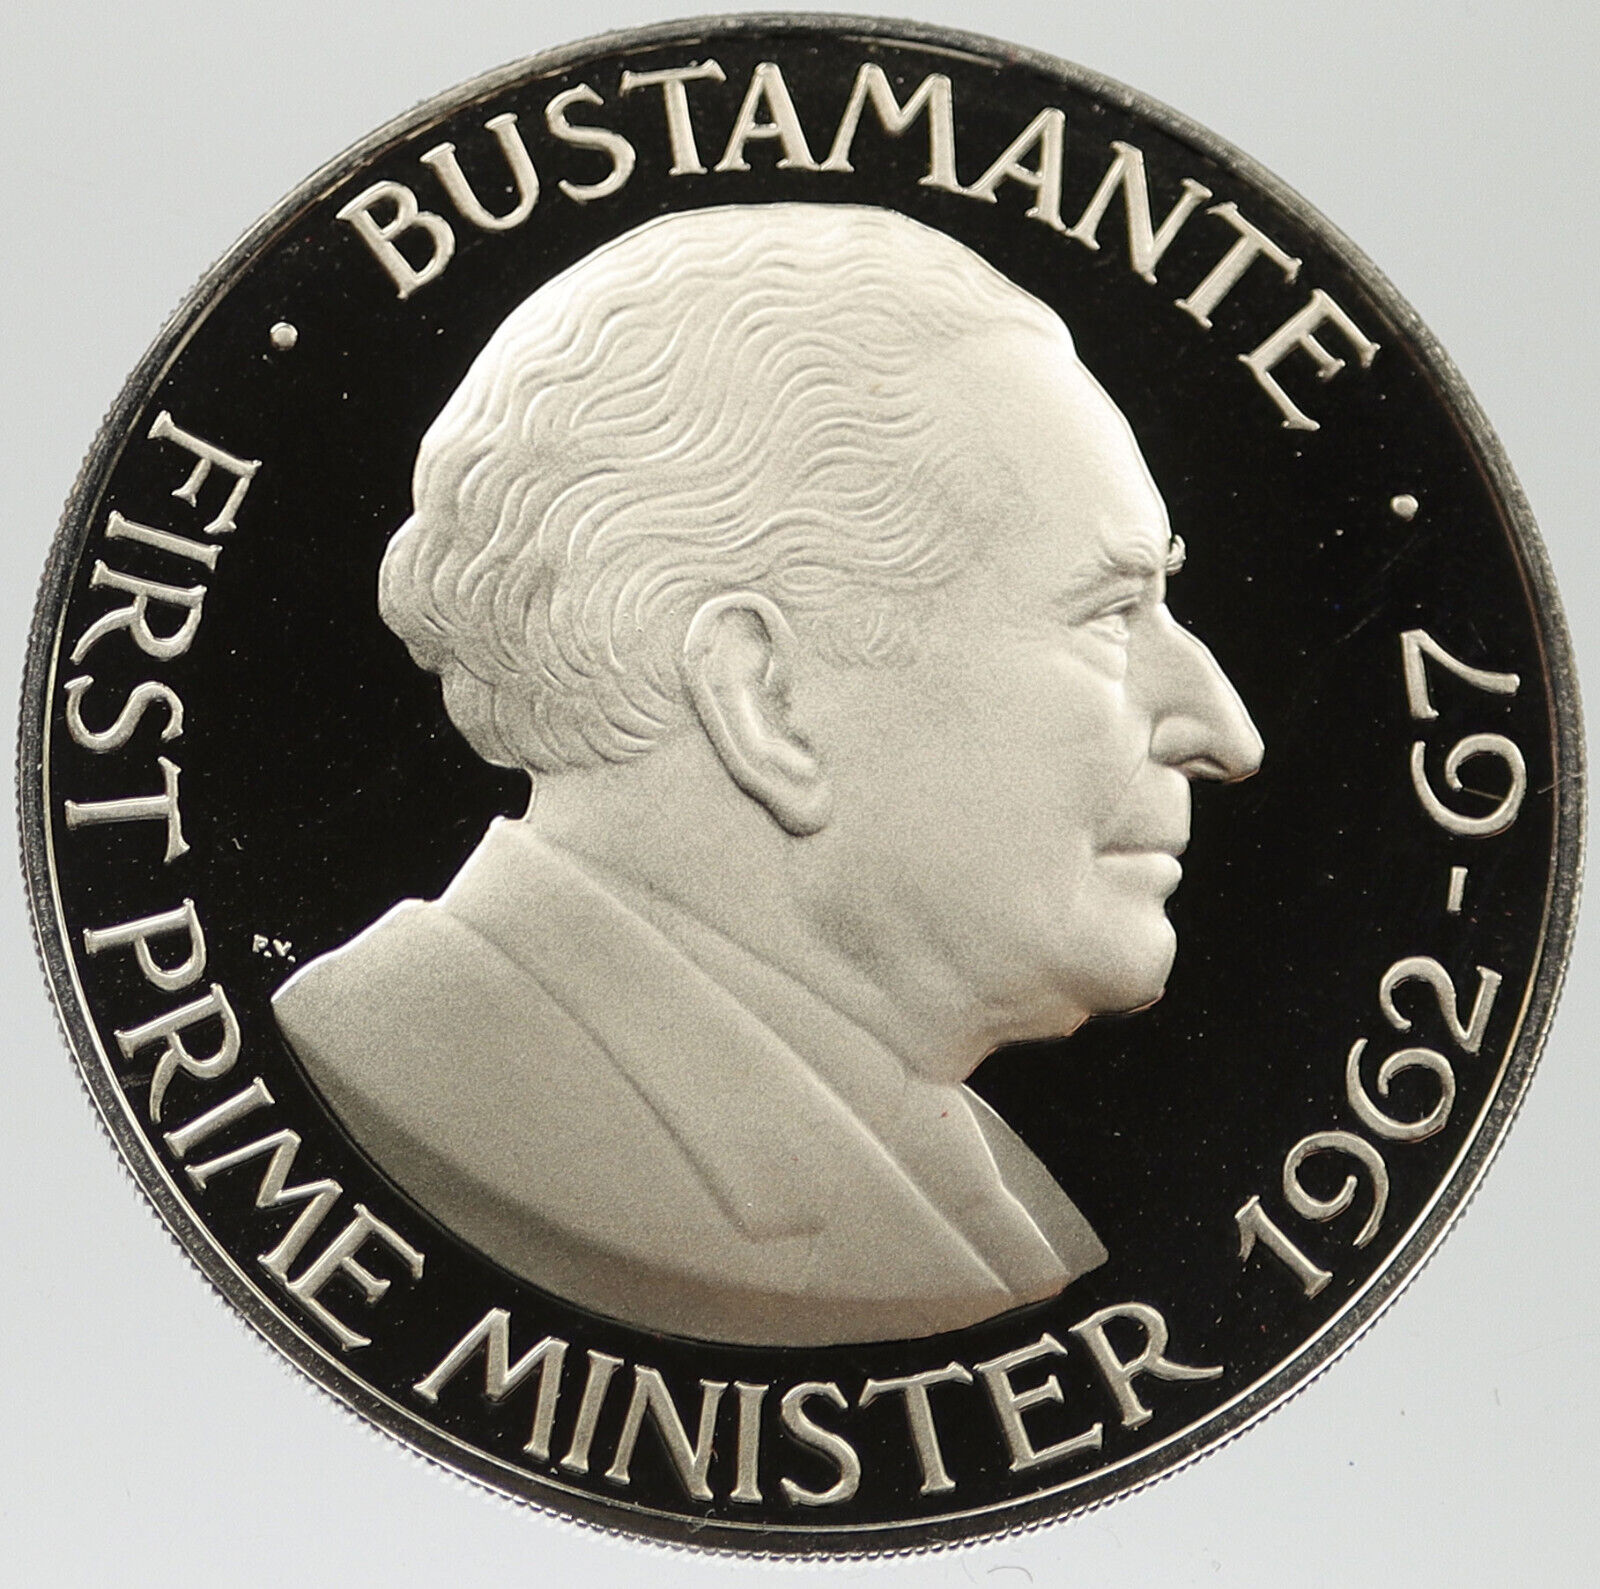 1976 JAMAICA First Prime Minister BUSTAMANTE Vintage Proof Dollar Coin i120280